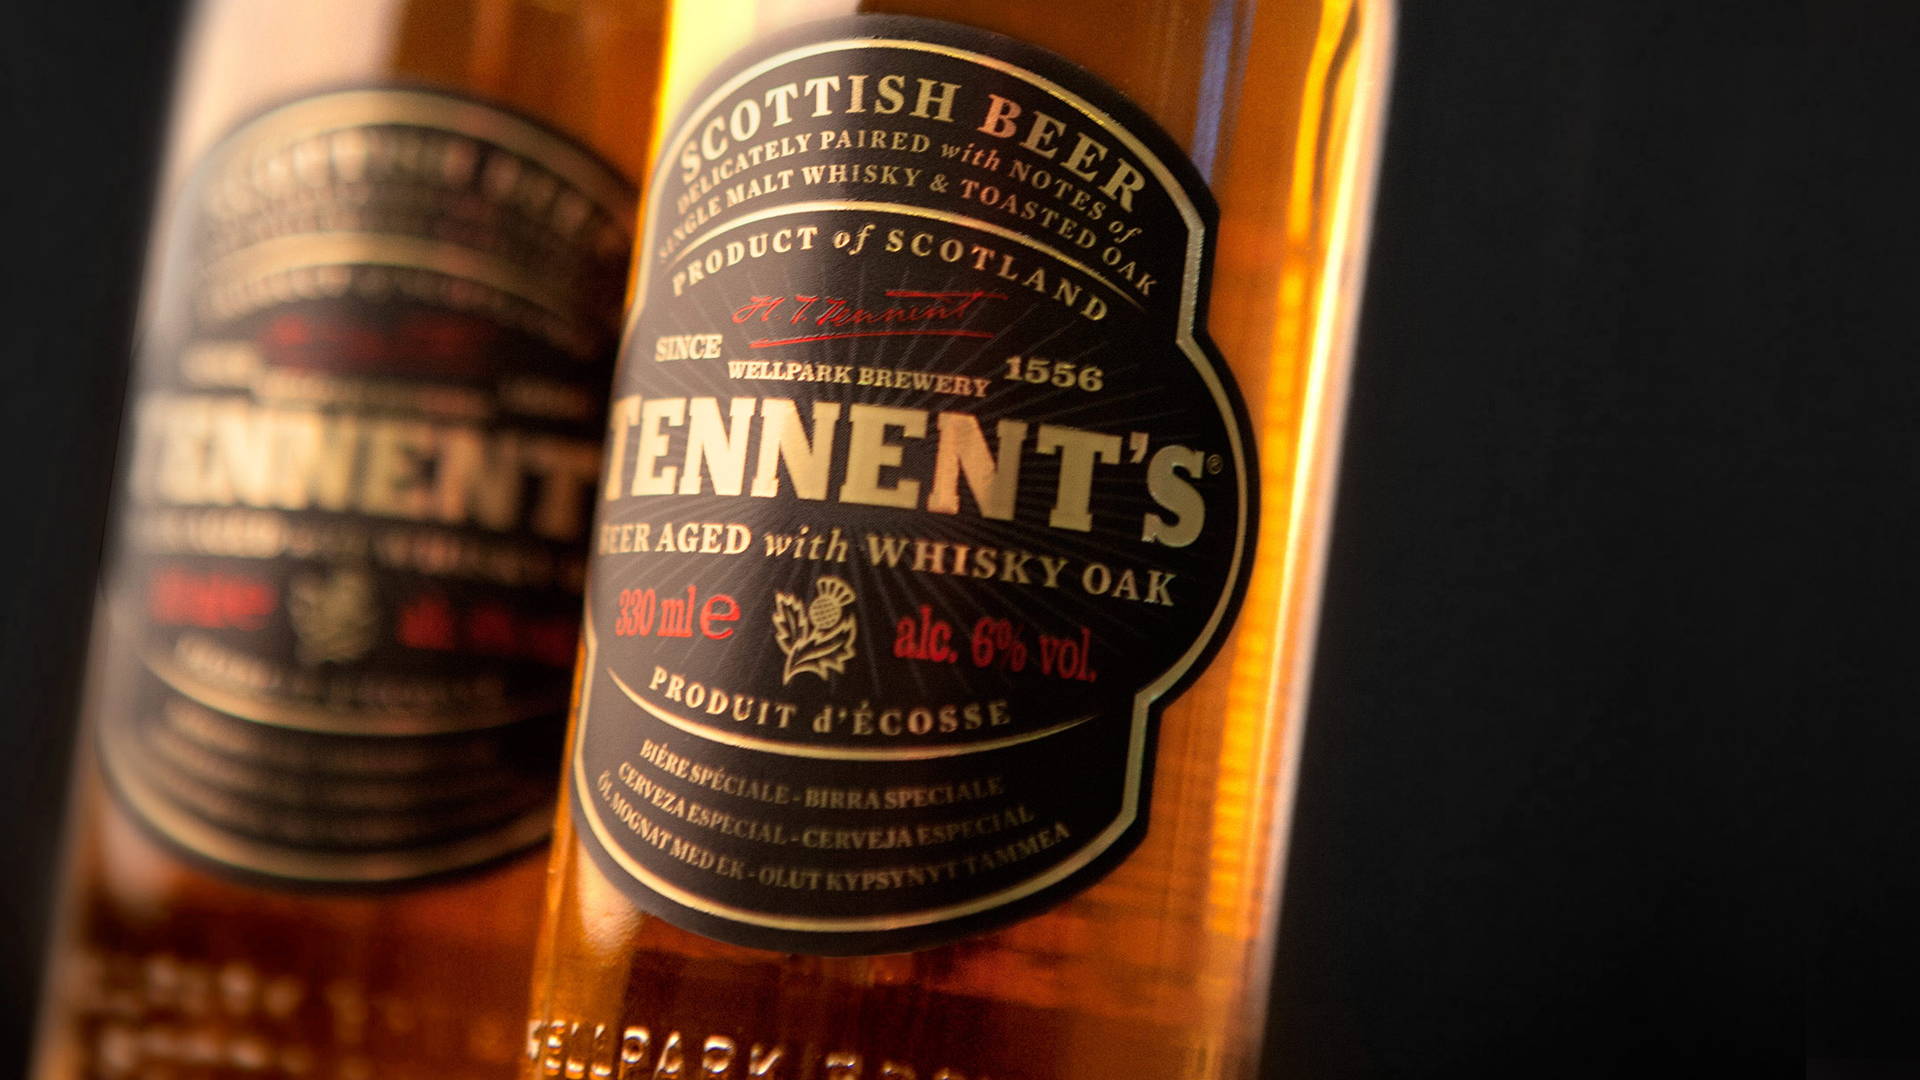 Featured image for Tennents Whisky Oak Aged Beer